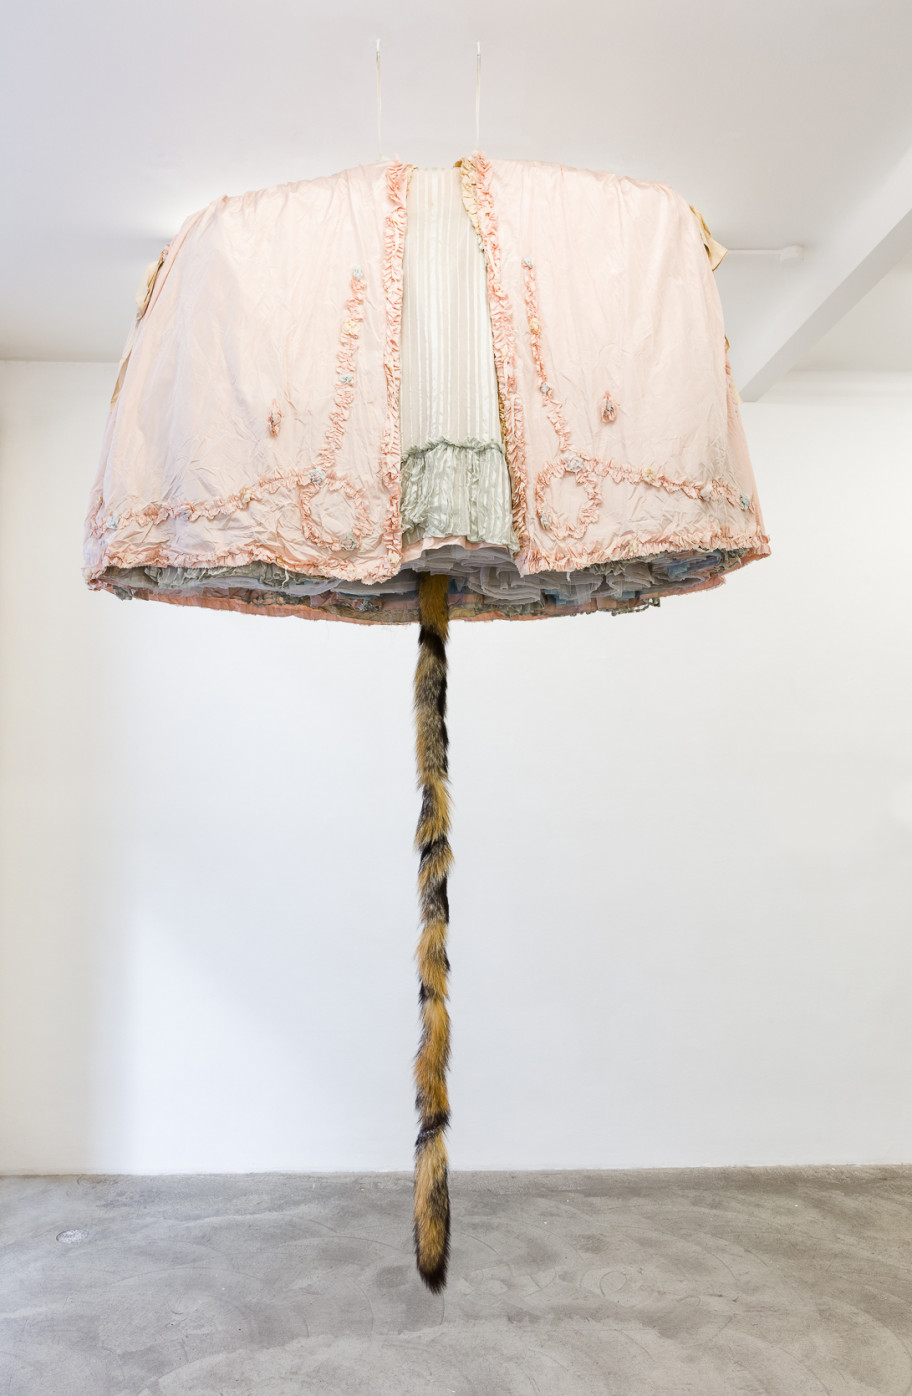 Sophie Jung  The Queen, 2020 the ancient regime’s lower half (fabric), hyena’s tail 270 x 110 x 40 cm 